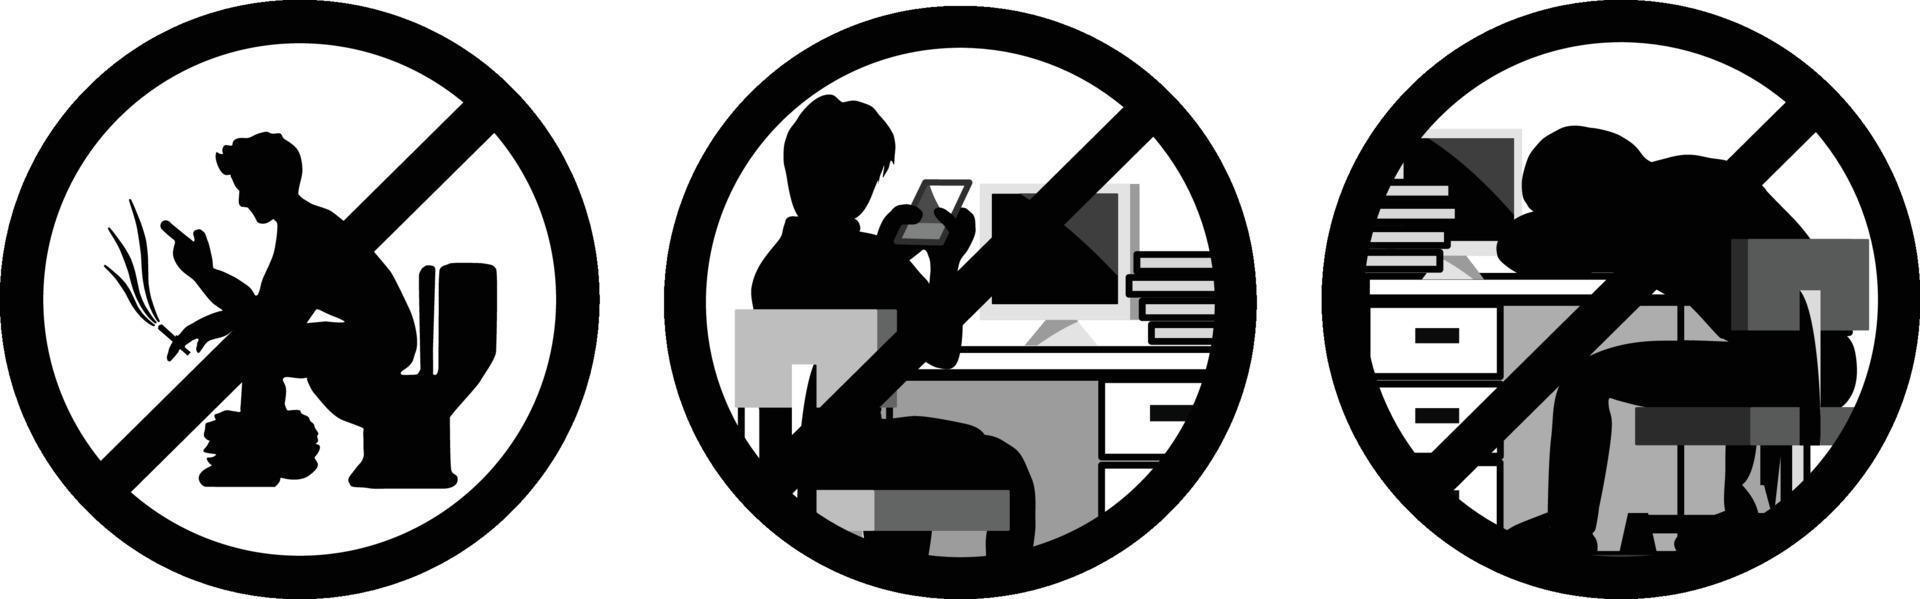 signs set for do not play with phone during working hours vector